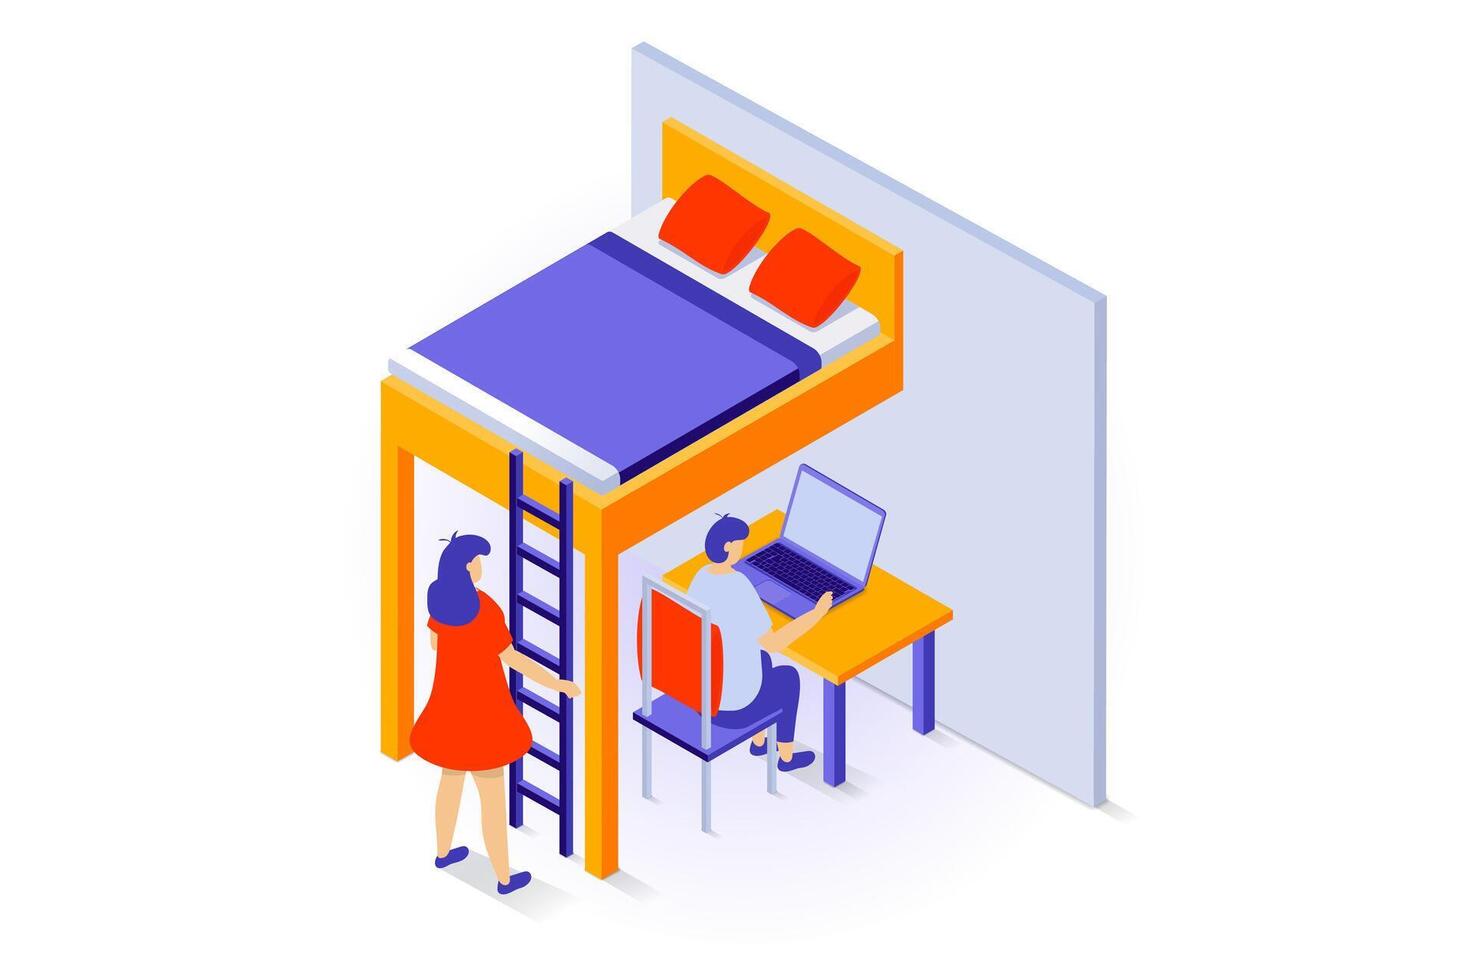 Home interior concept in 3d isometric design. People in bedroom with hanging bed and ladder, small workplace with table, chair and laptop. Vector illustration with isometry scene for web graphic